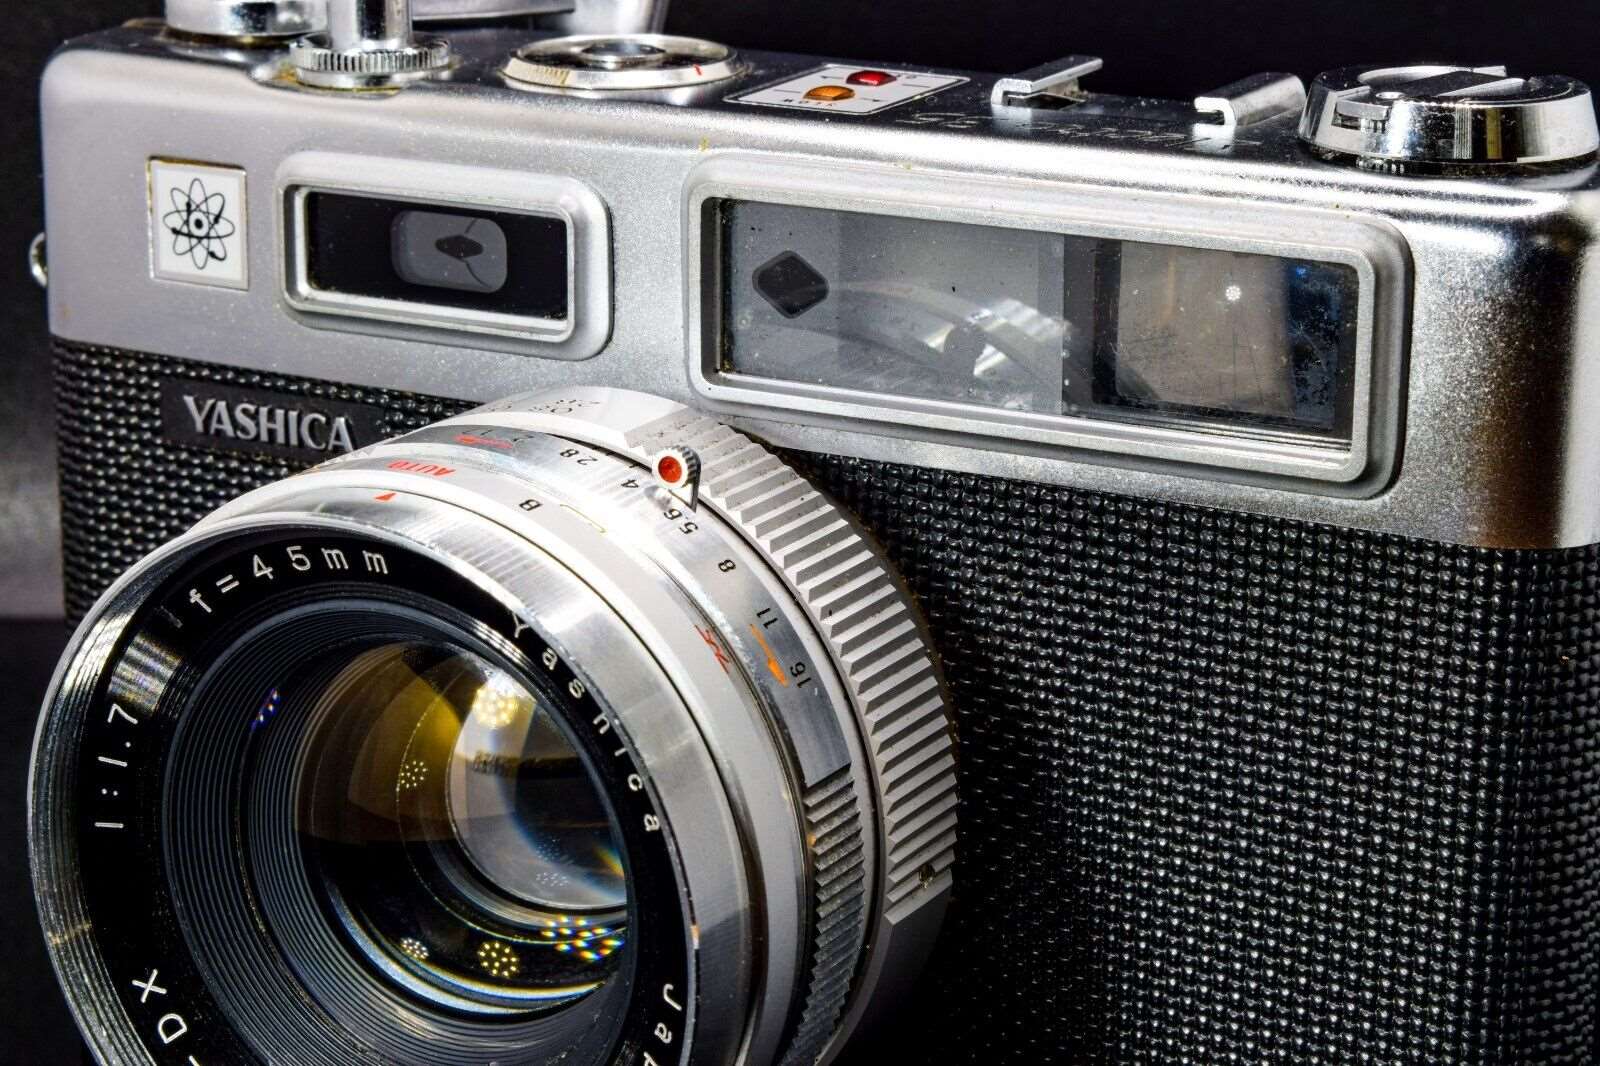 YASHICA Electro 35 Film Camera 35mm in Black and Silver with YASHINON DX f1.7 45mm Lens